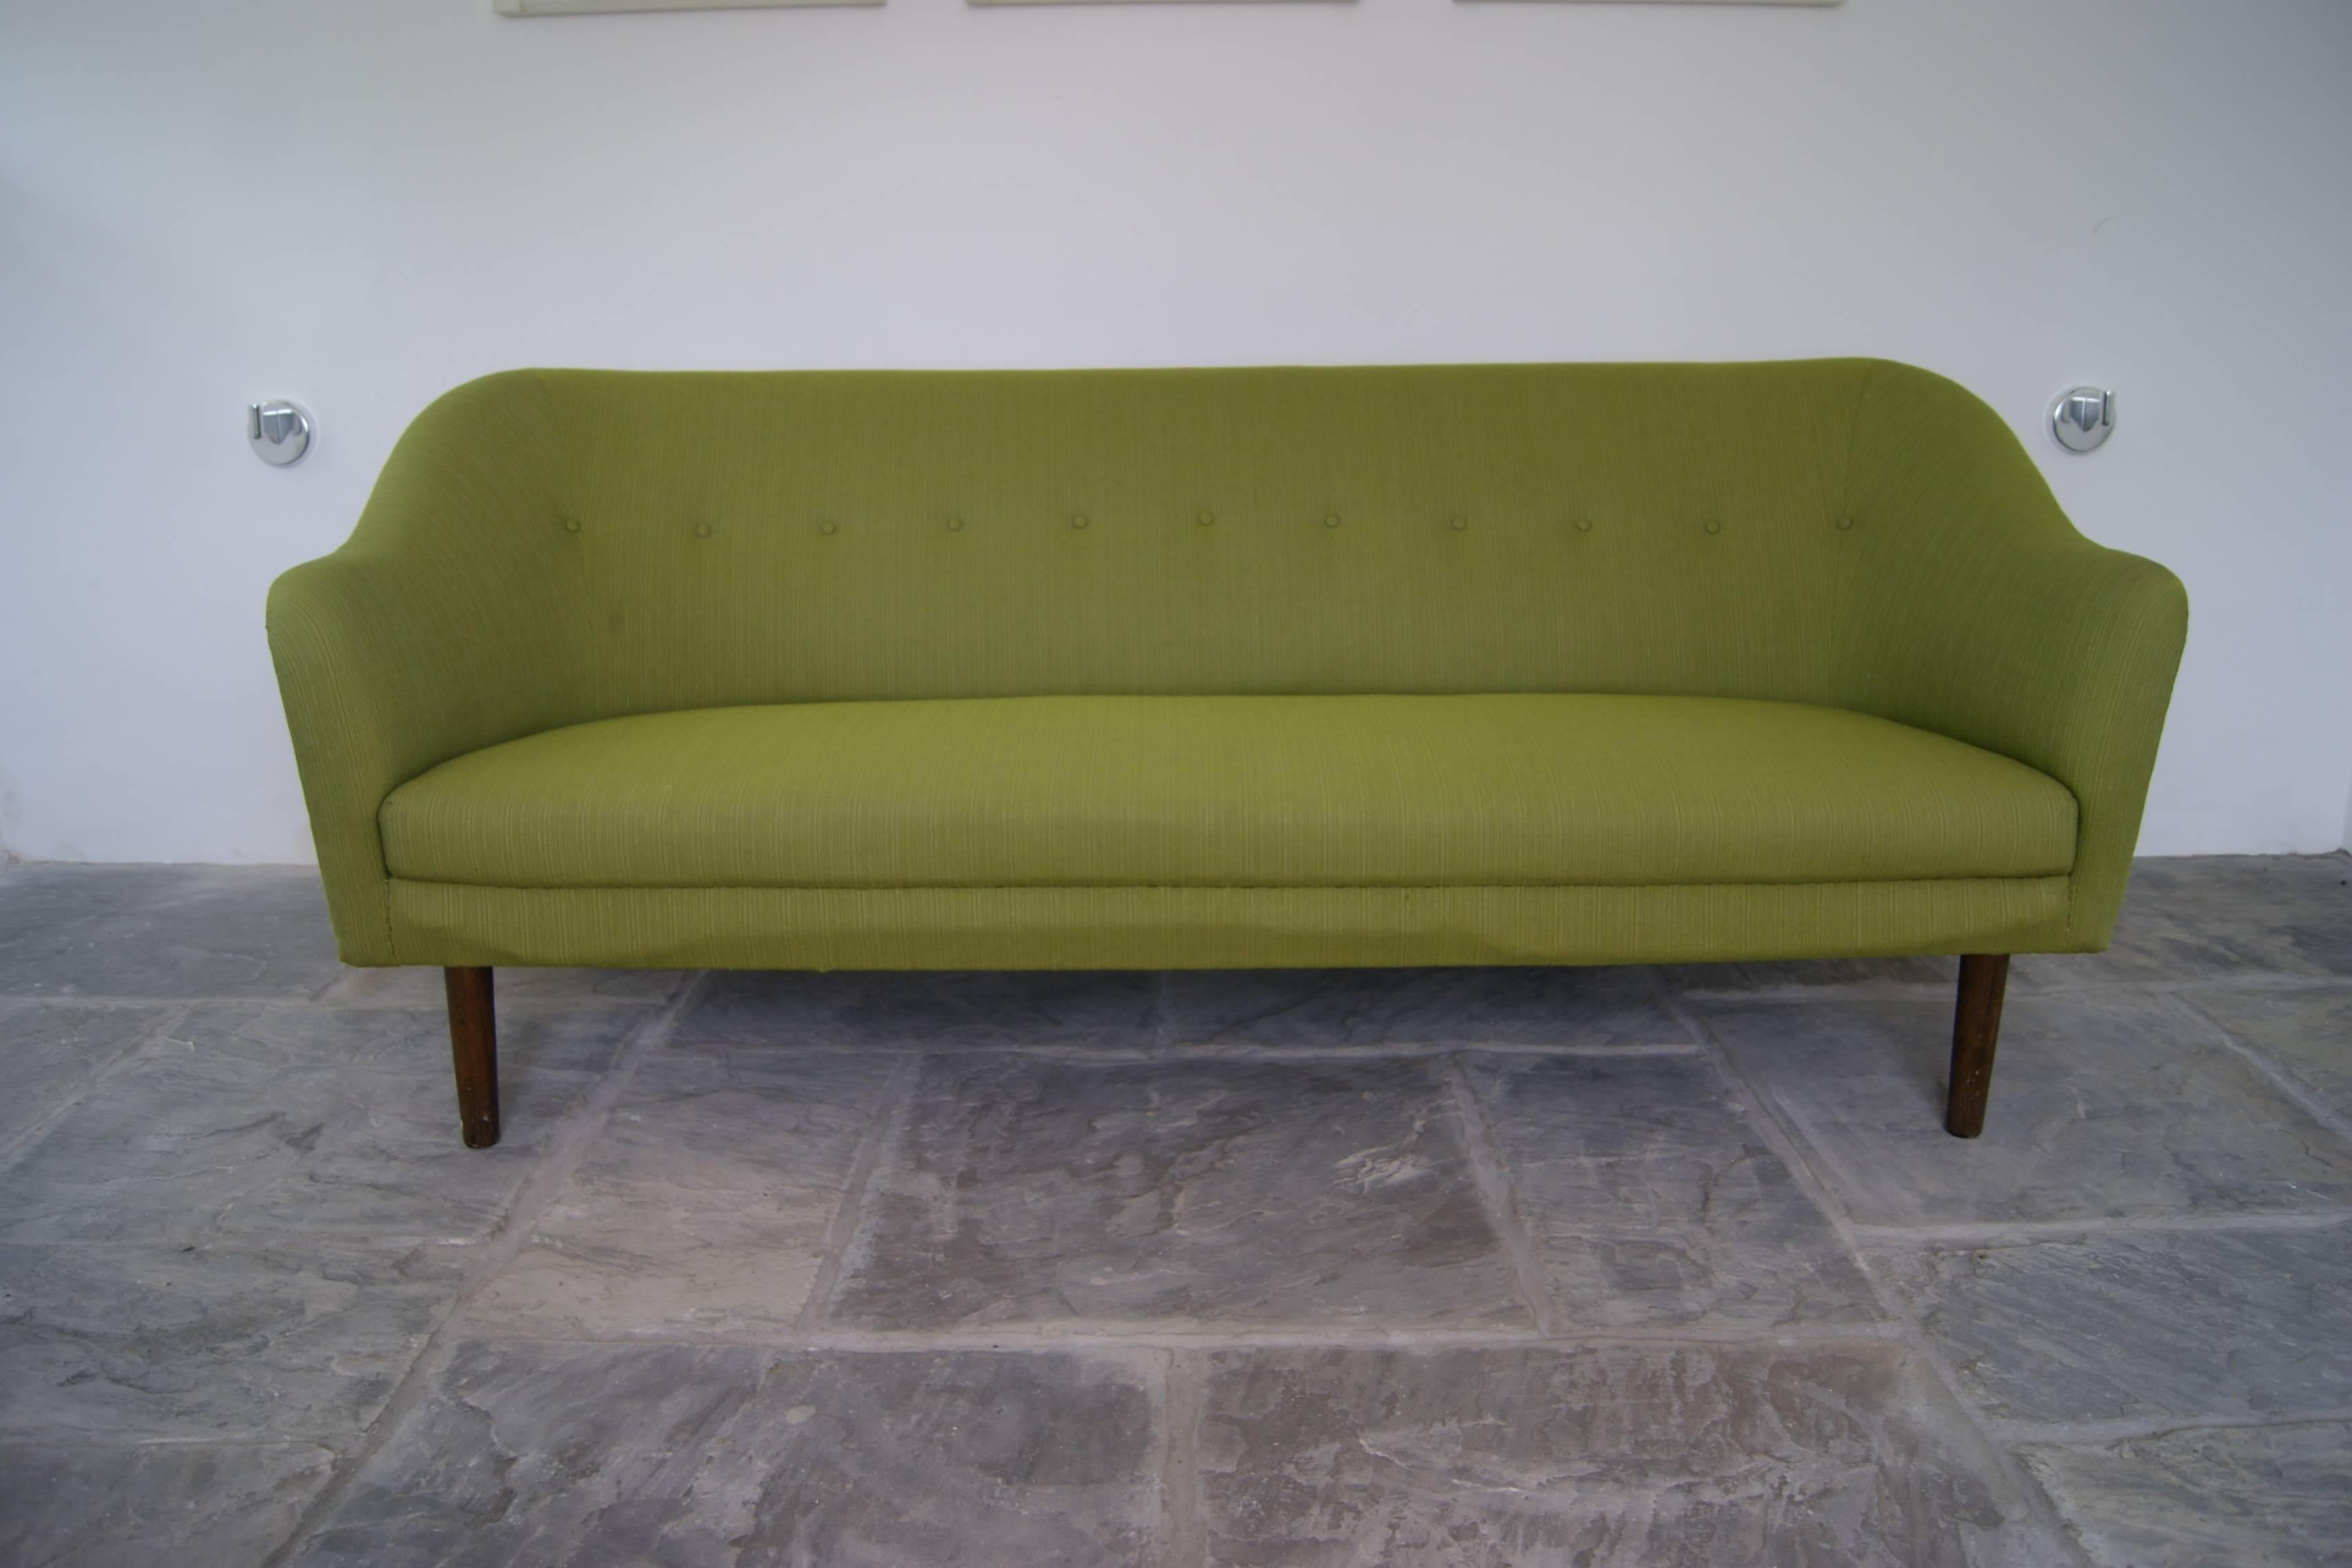 Danish Mid-Century three-seat sofa with curved details, button back detail and dark stained wooden legs. Can be reupholstered on request - charged separately.